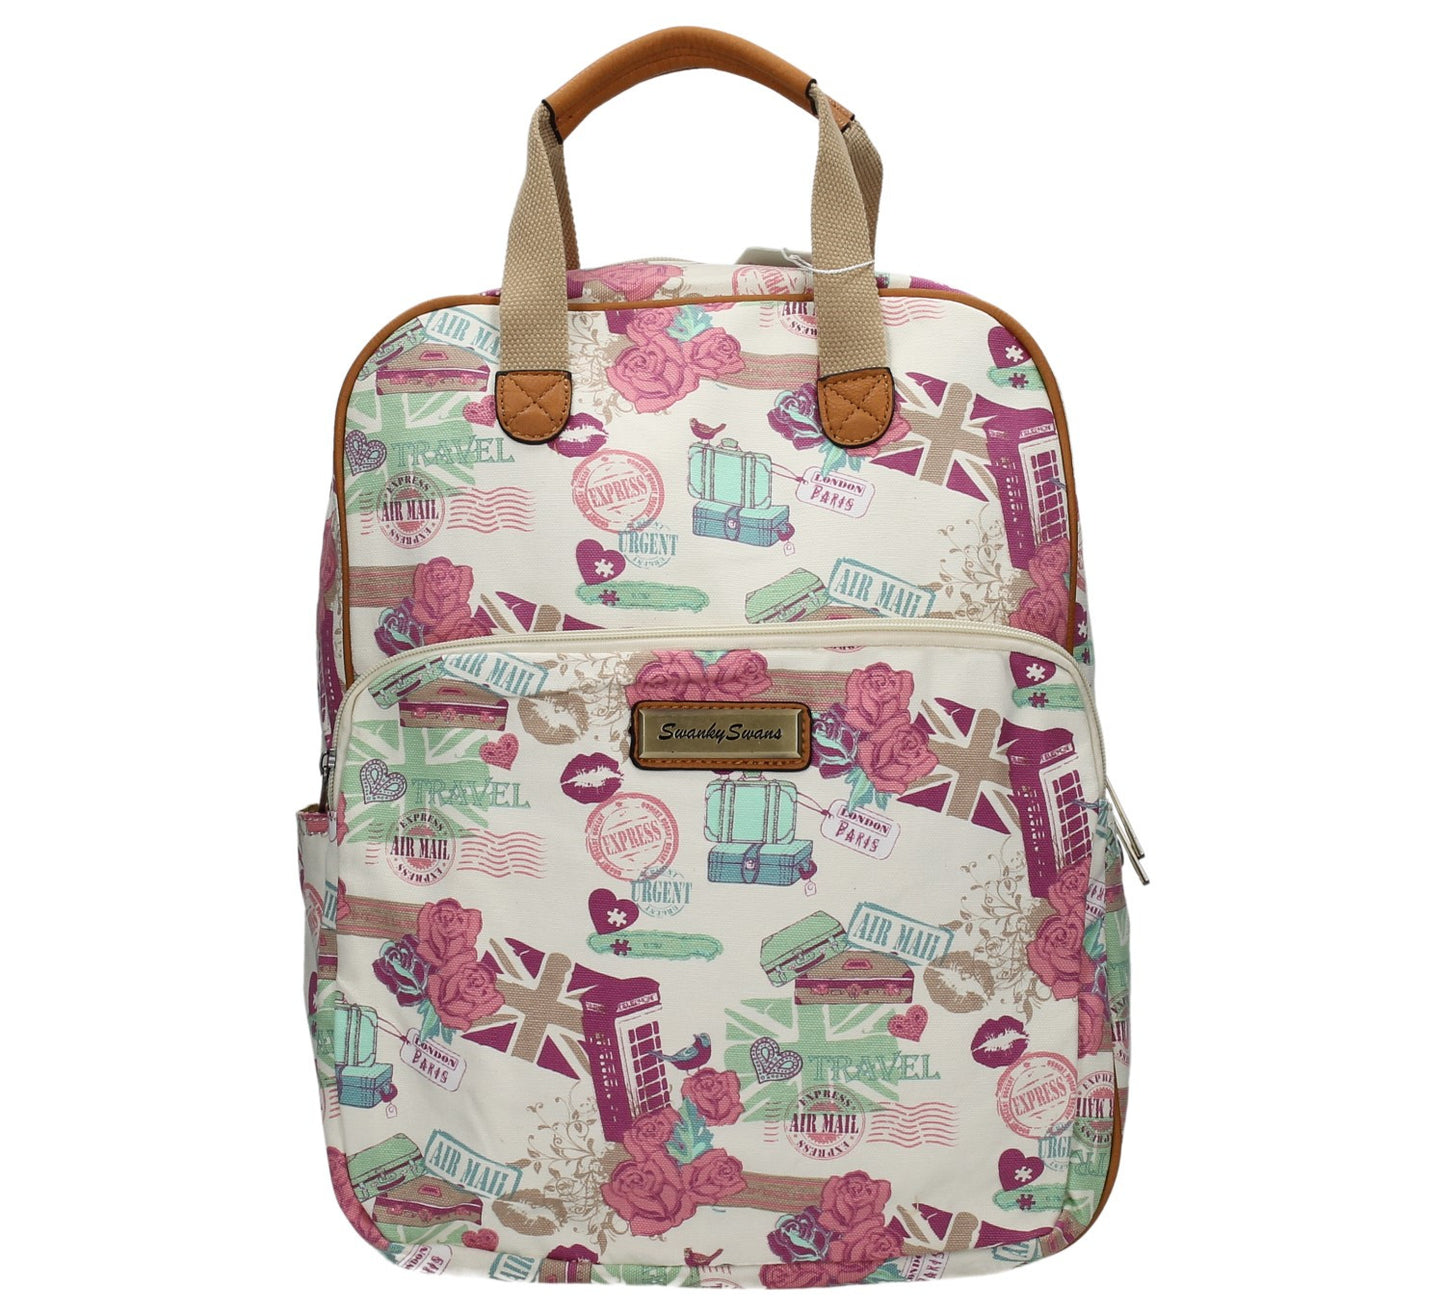 Swanky Swans Kensington London Travel Backpack with Matching Ipad / Tablet Case - BeigeBeautiful cheap school backpack bag